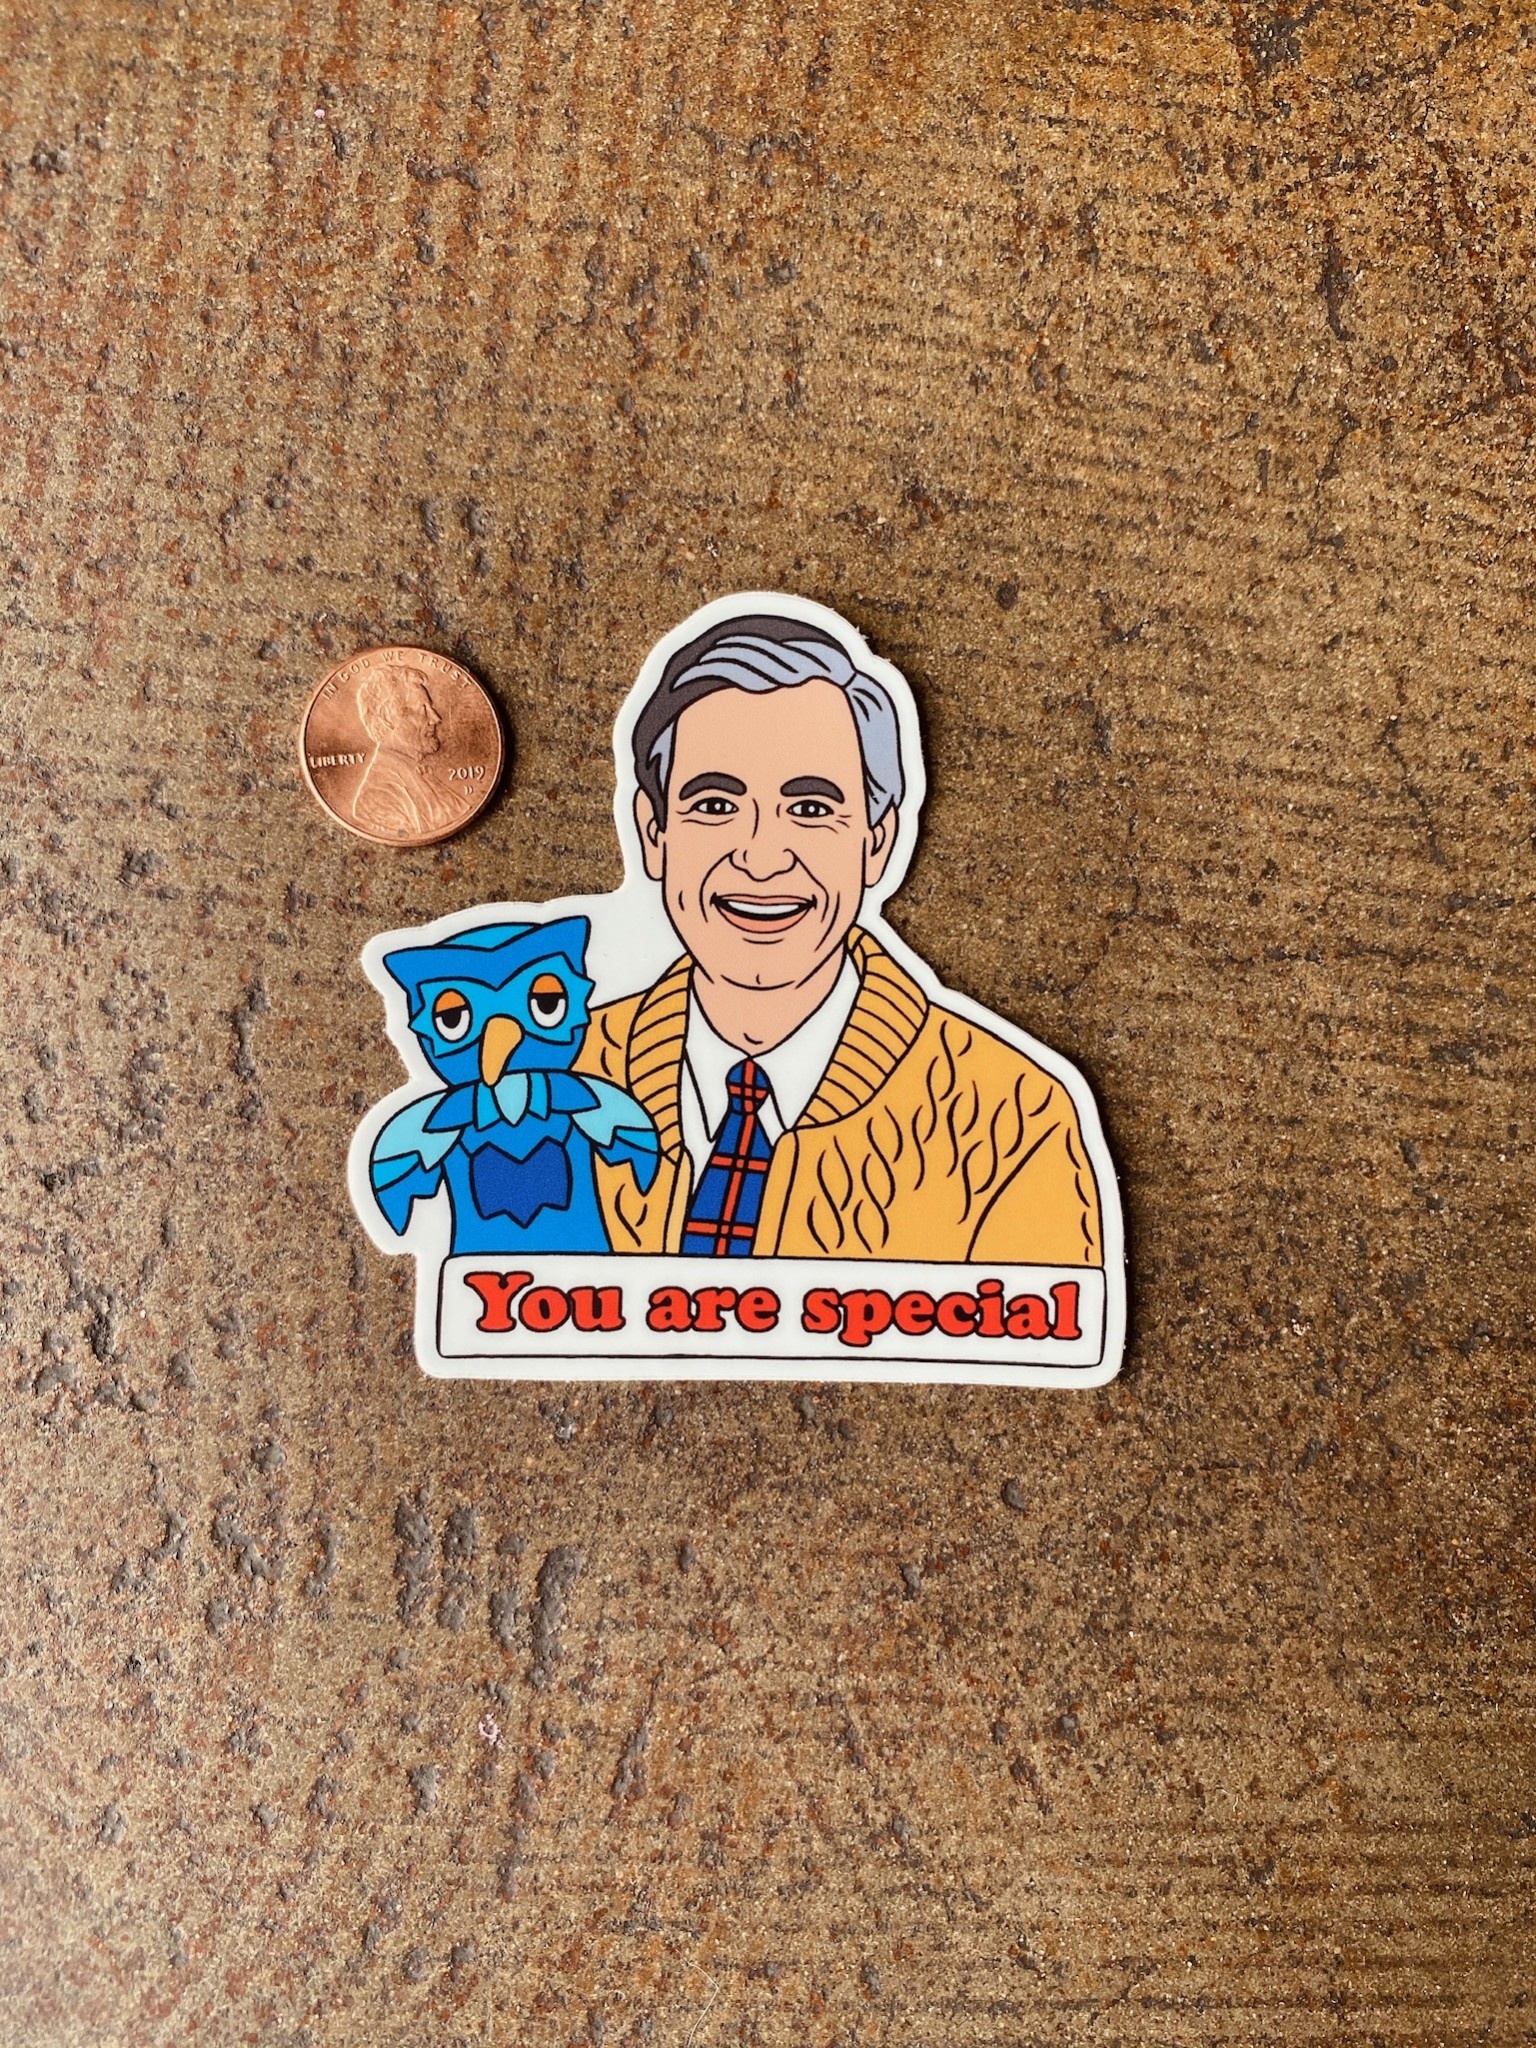 The Found Mr. Rogers Special Sticker